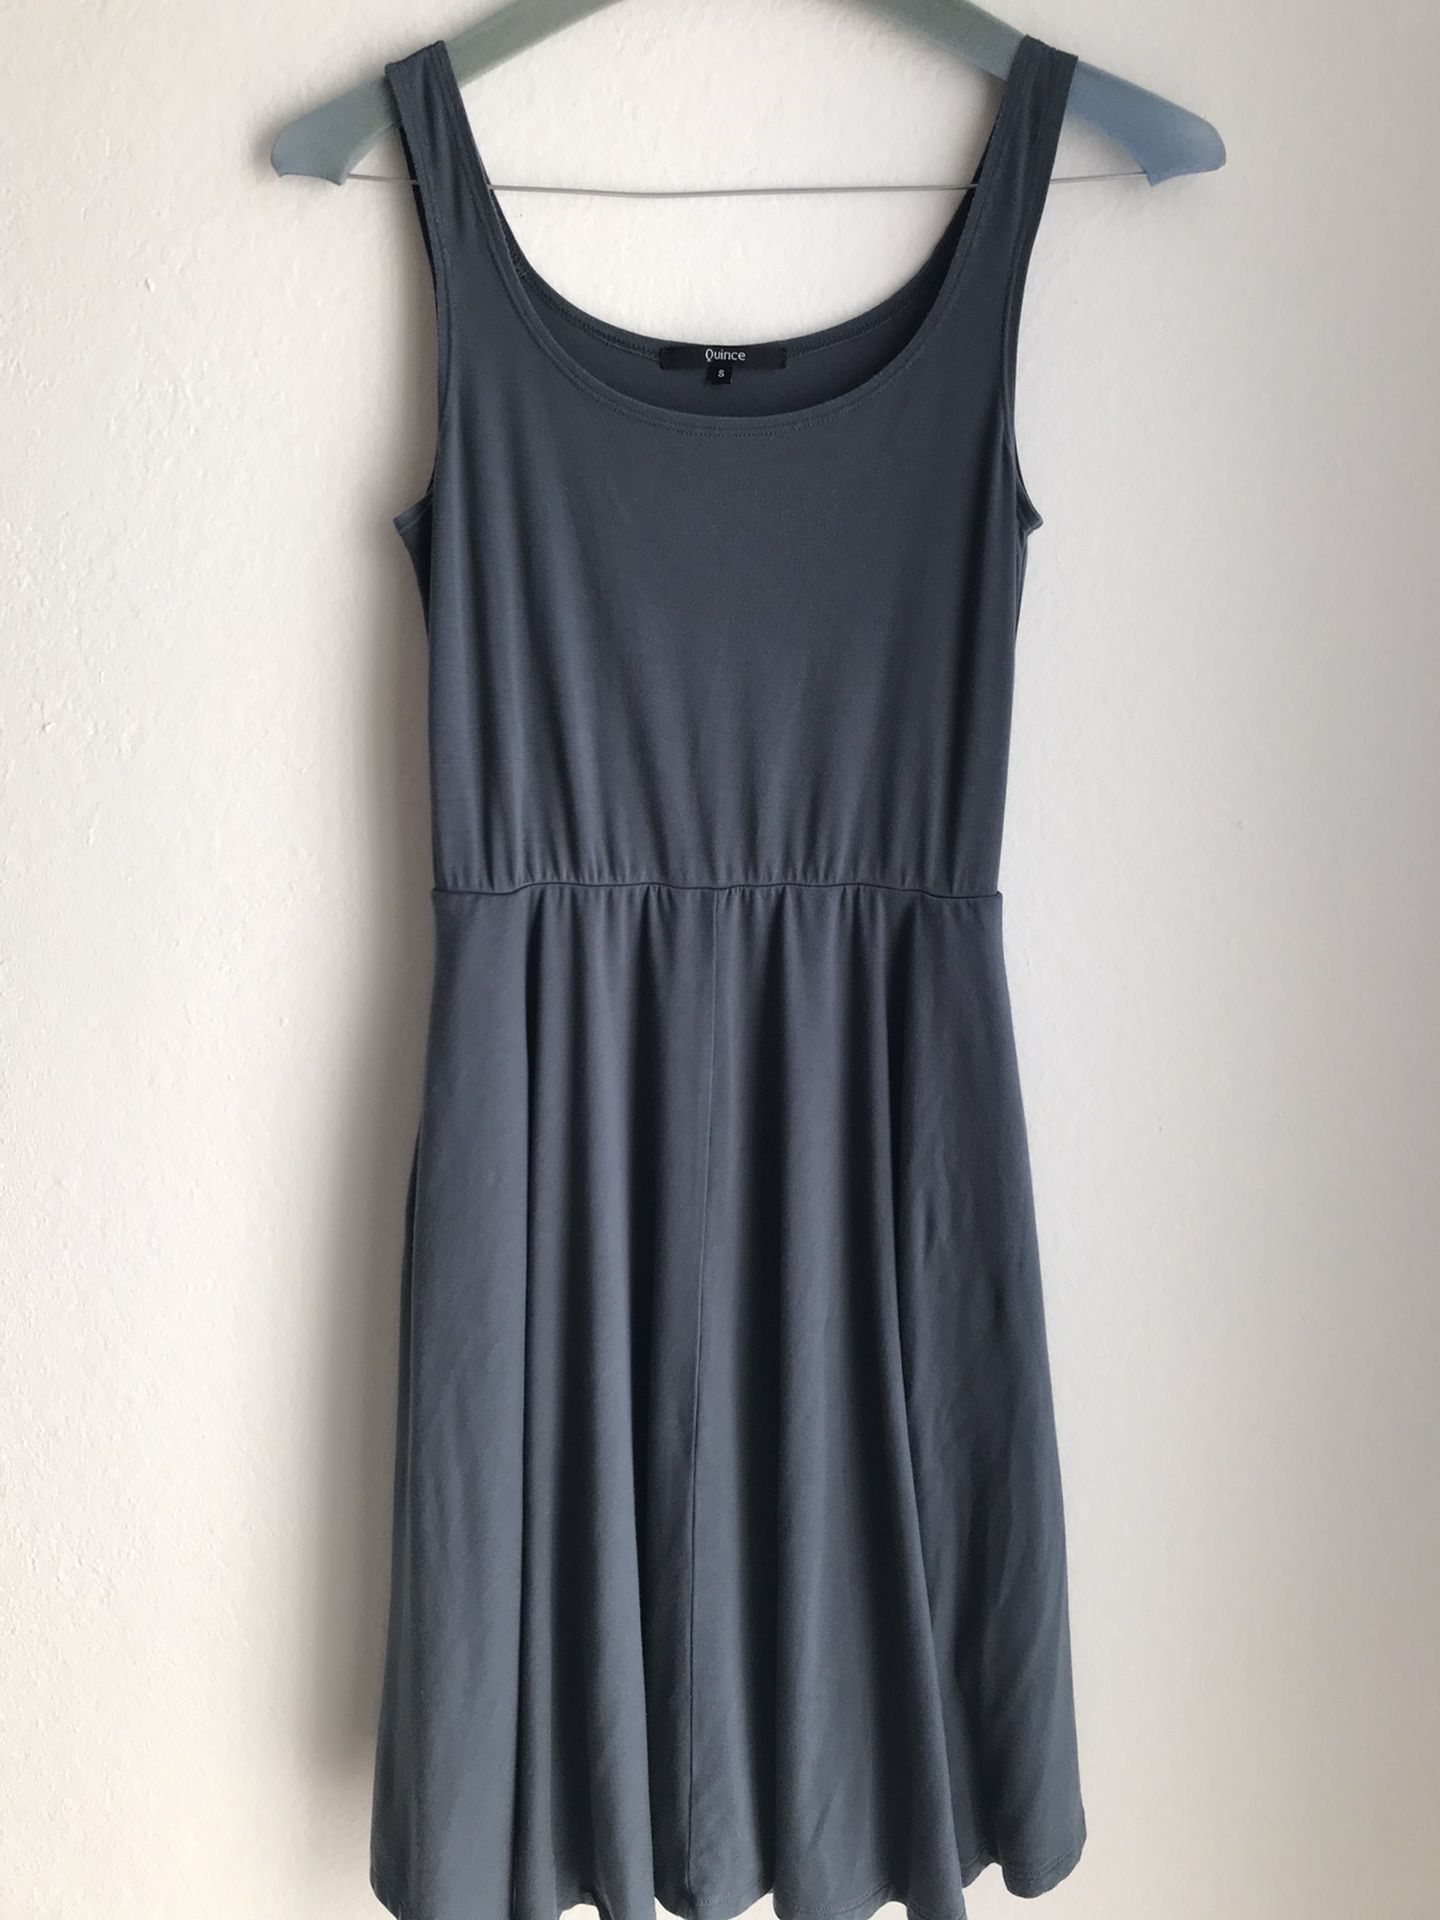 Quince Jersey Mini dress size s 